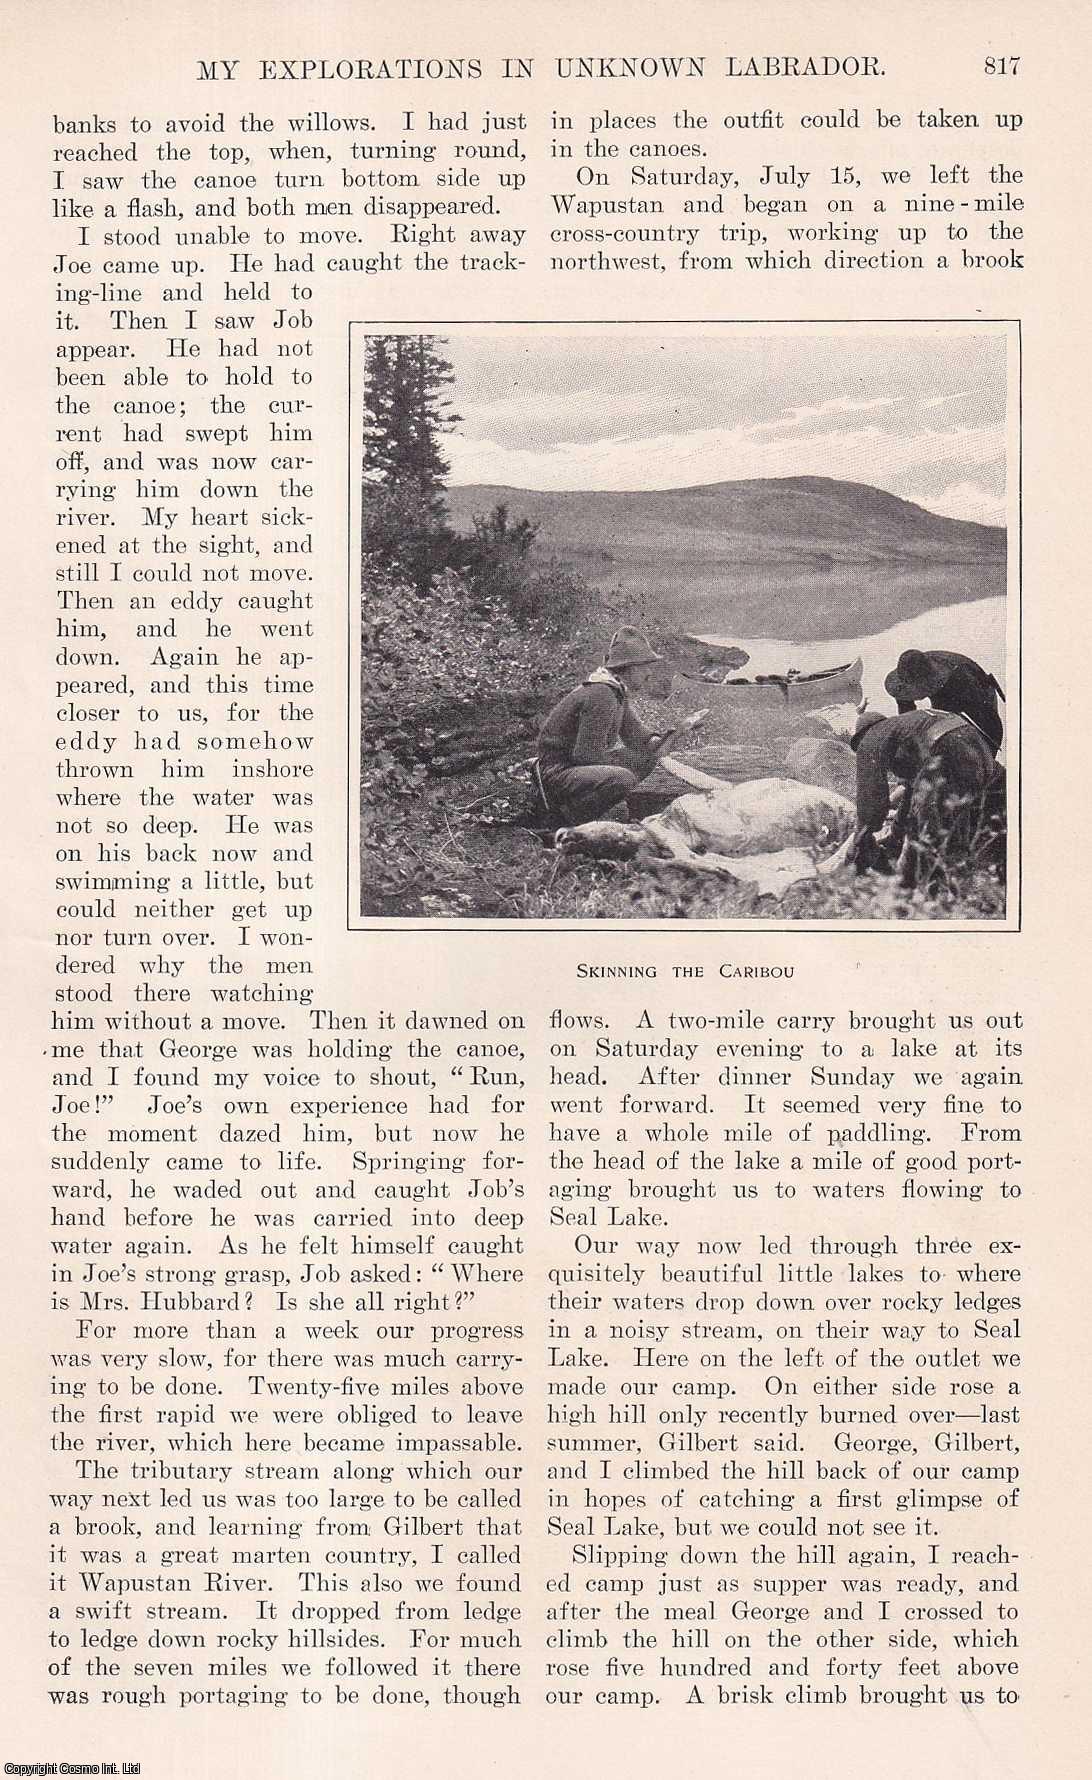 Mina B. Hubbard - My Explorations in Unknown Labrador. This is an original article from the Harper's Monthly Magazine, 1906.